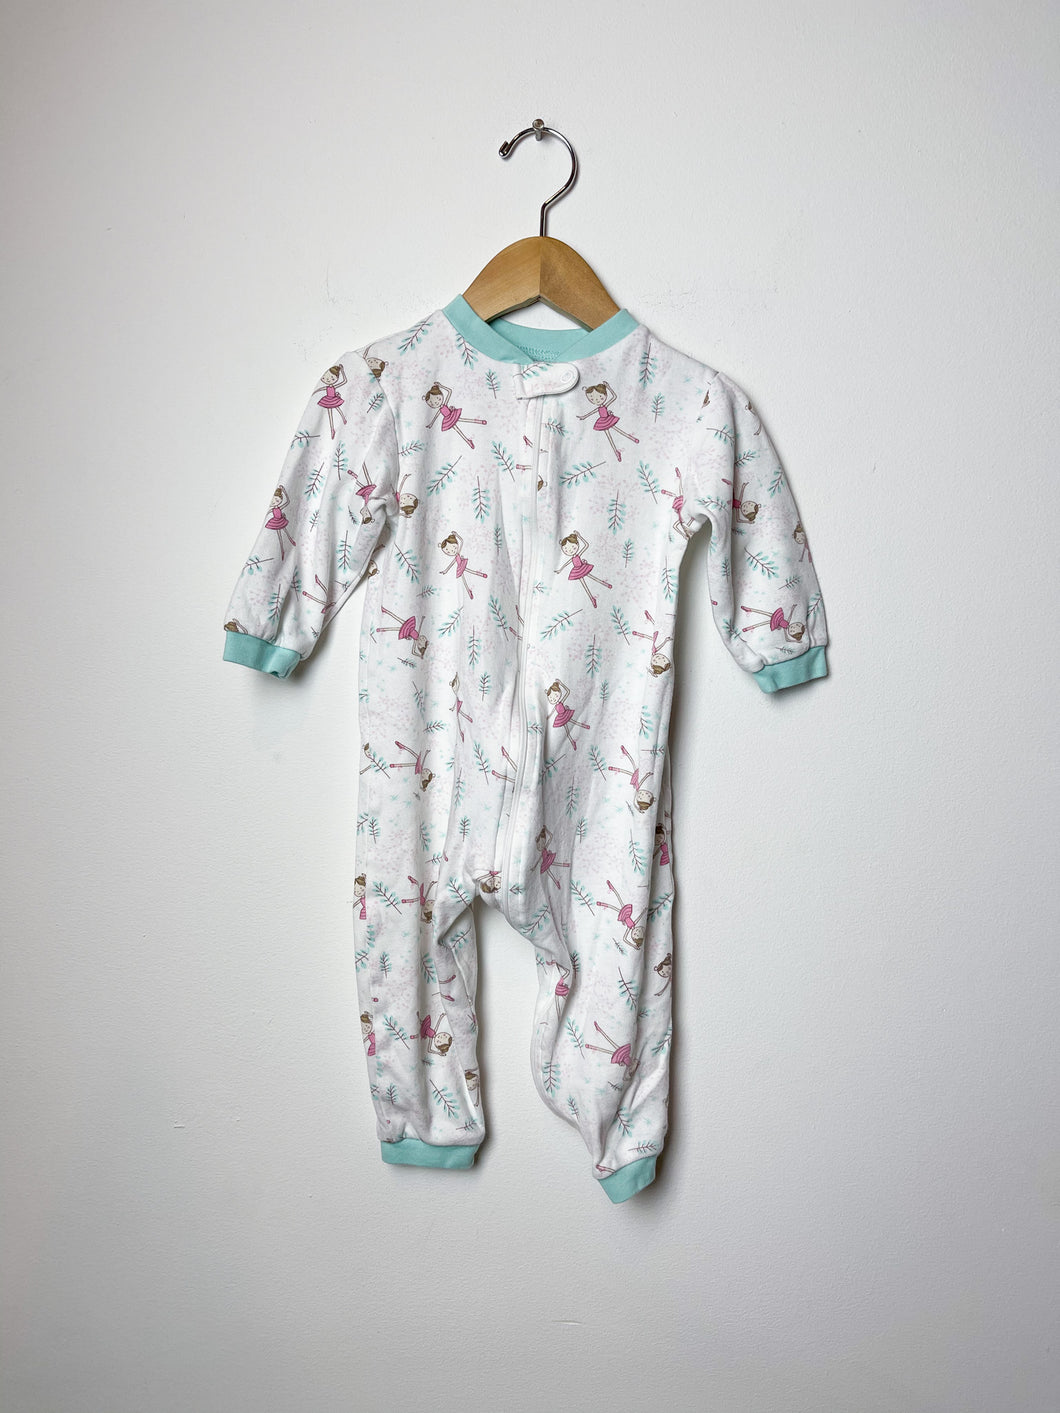 Girls George 2 Pack Sleepers Size 18-24 Months